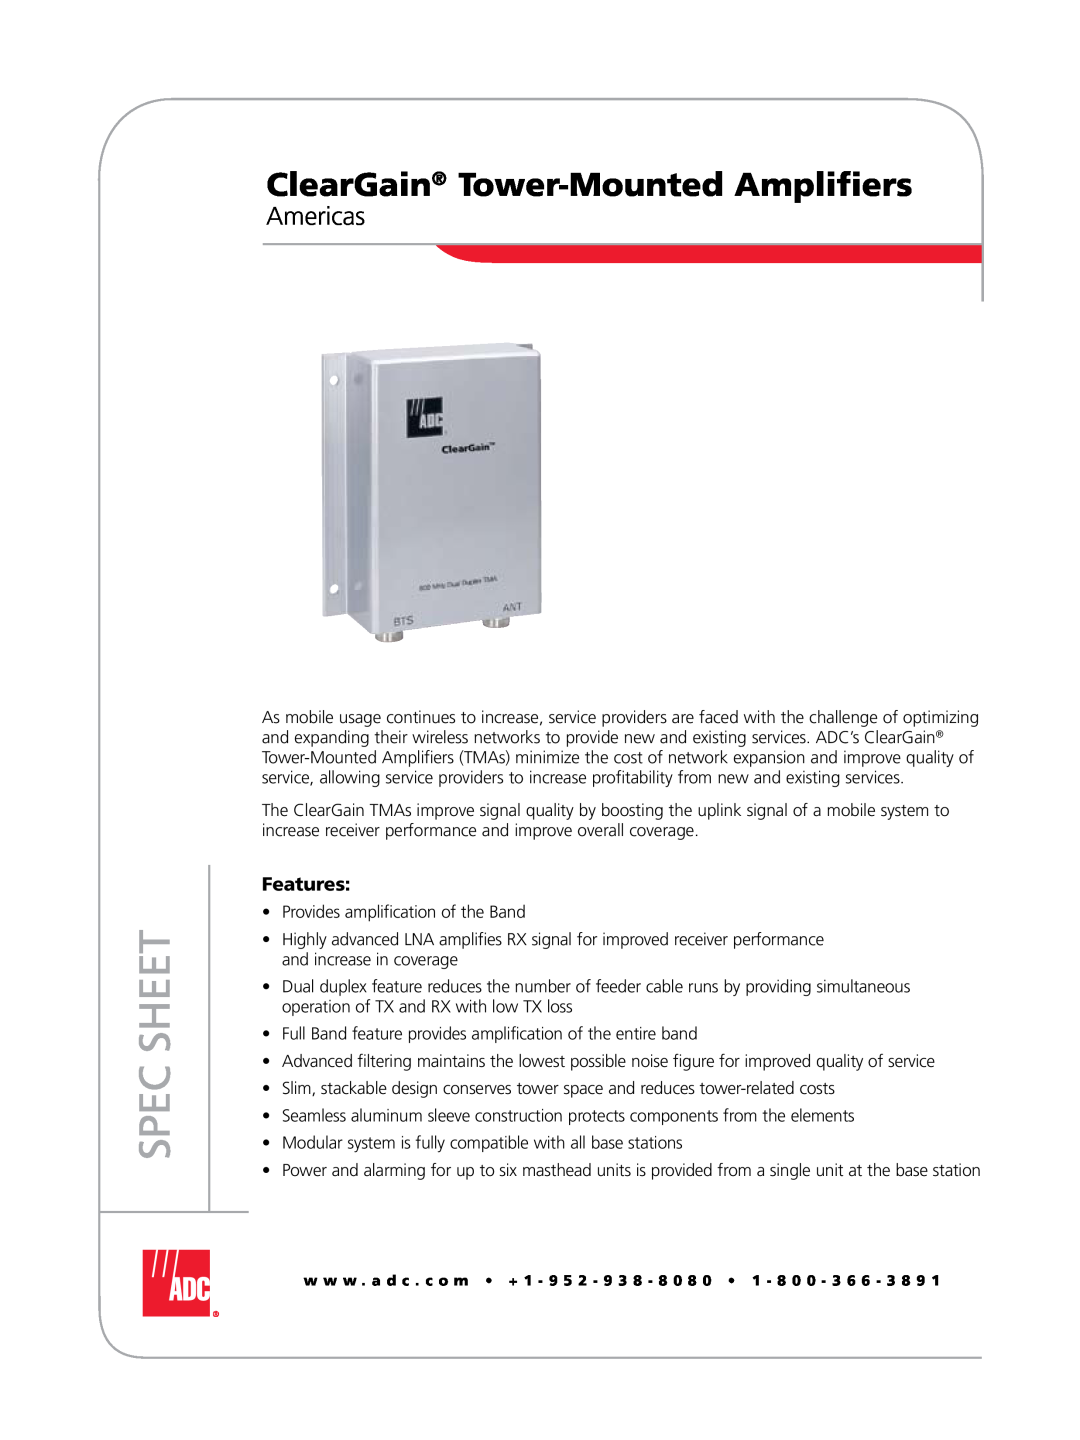 ADC Tower-Mounted Amplifiers manual ClearGain Tower-MountedAmplifiers, Americas, Features, Spec Sheet 